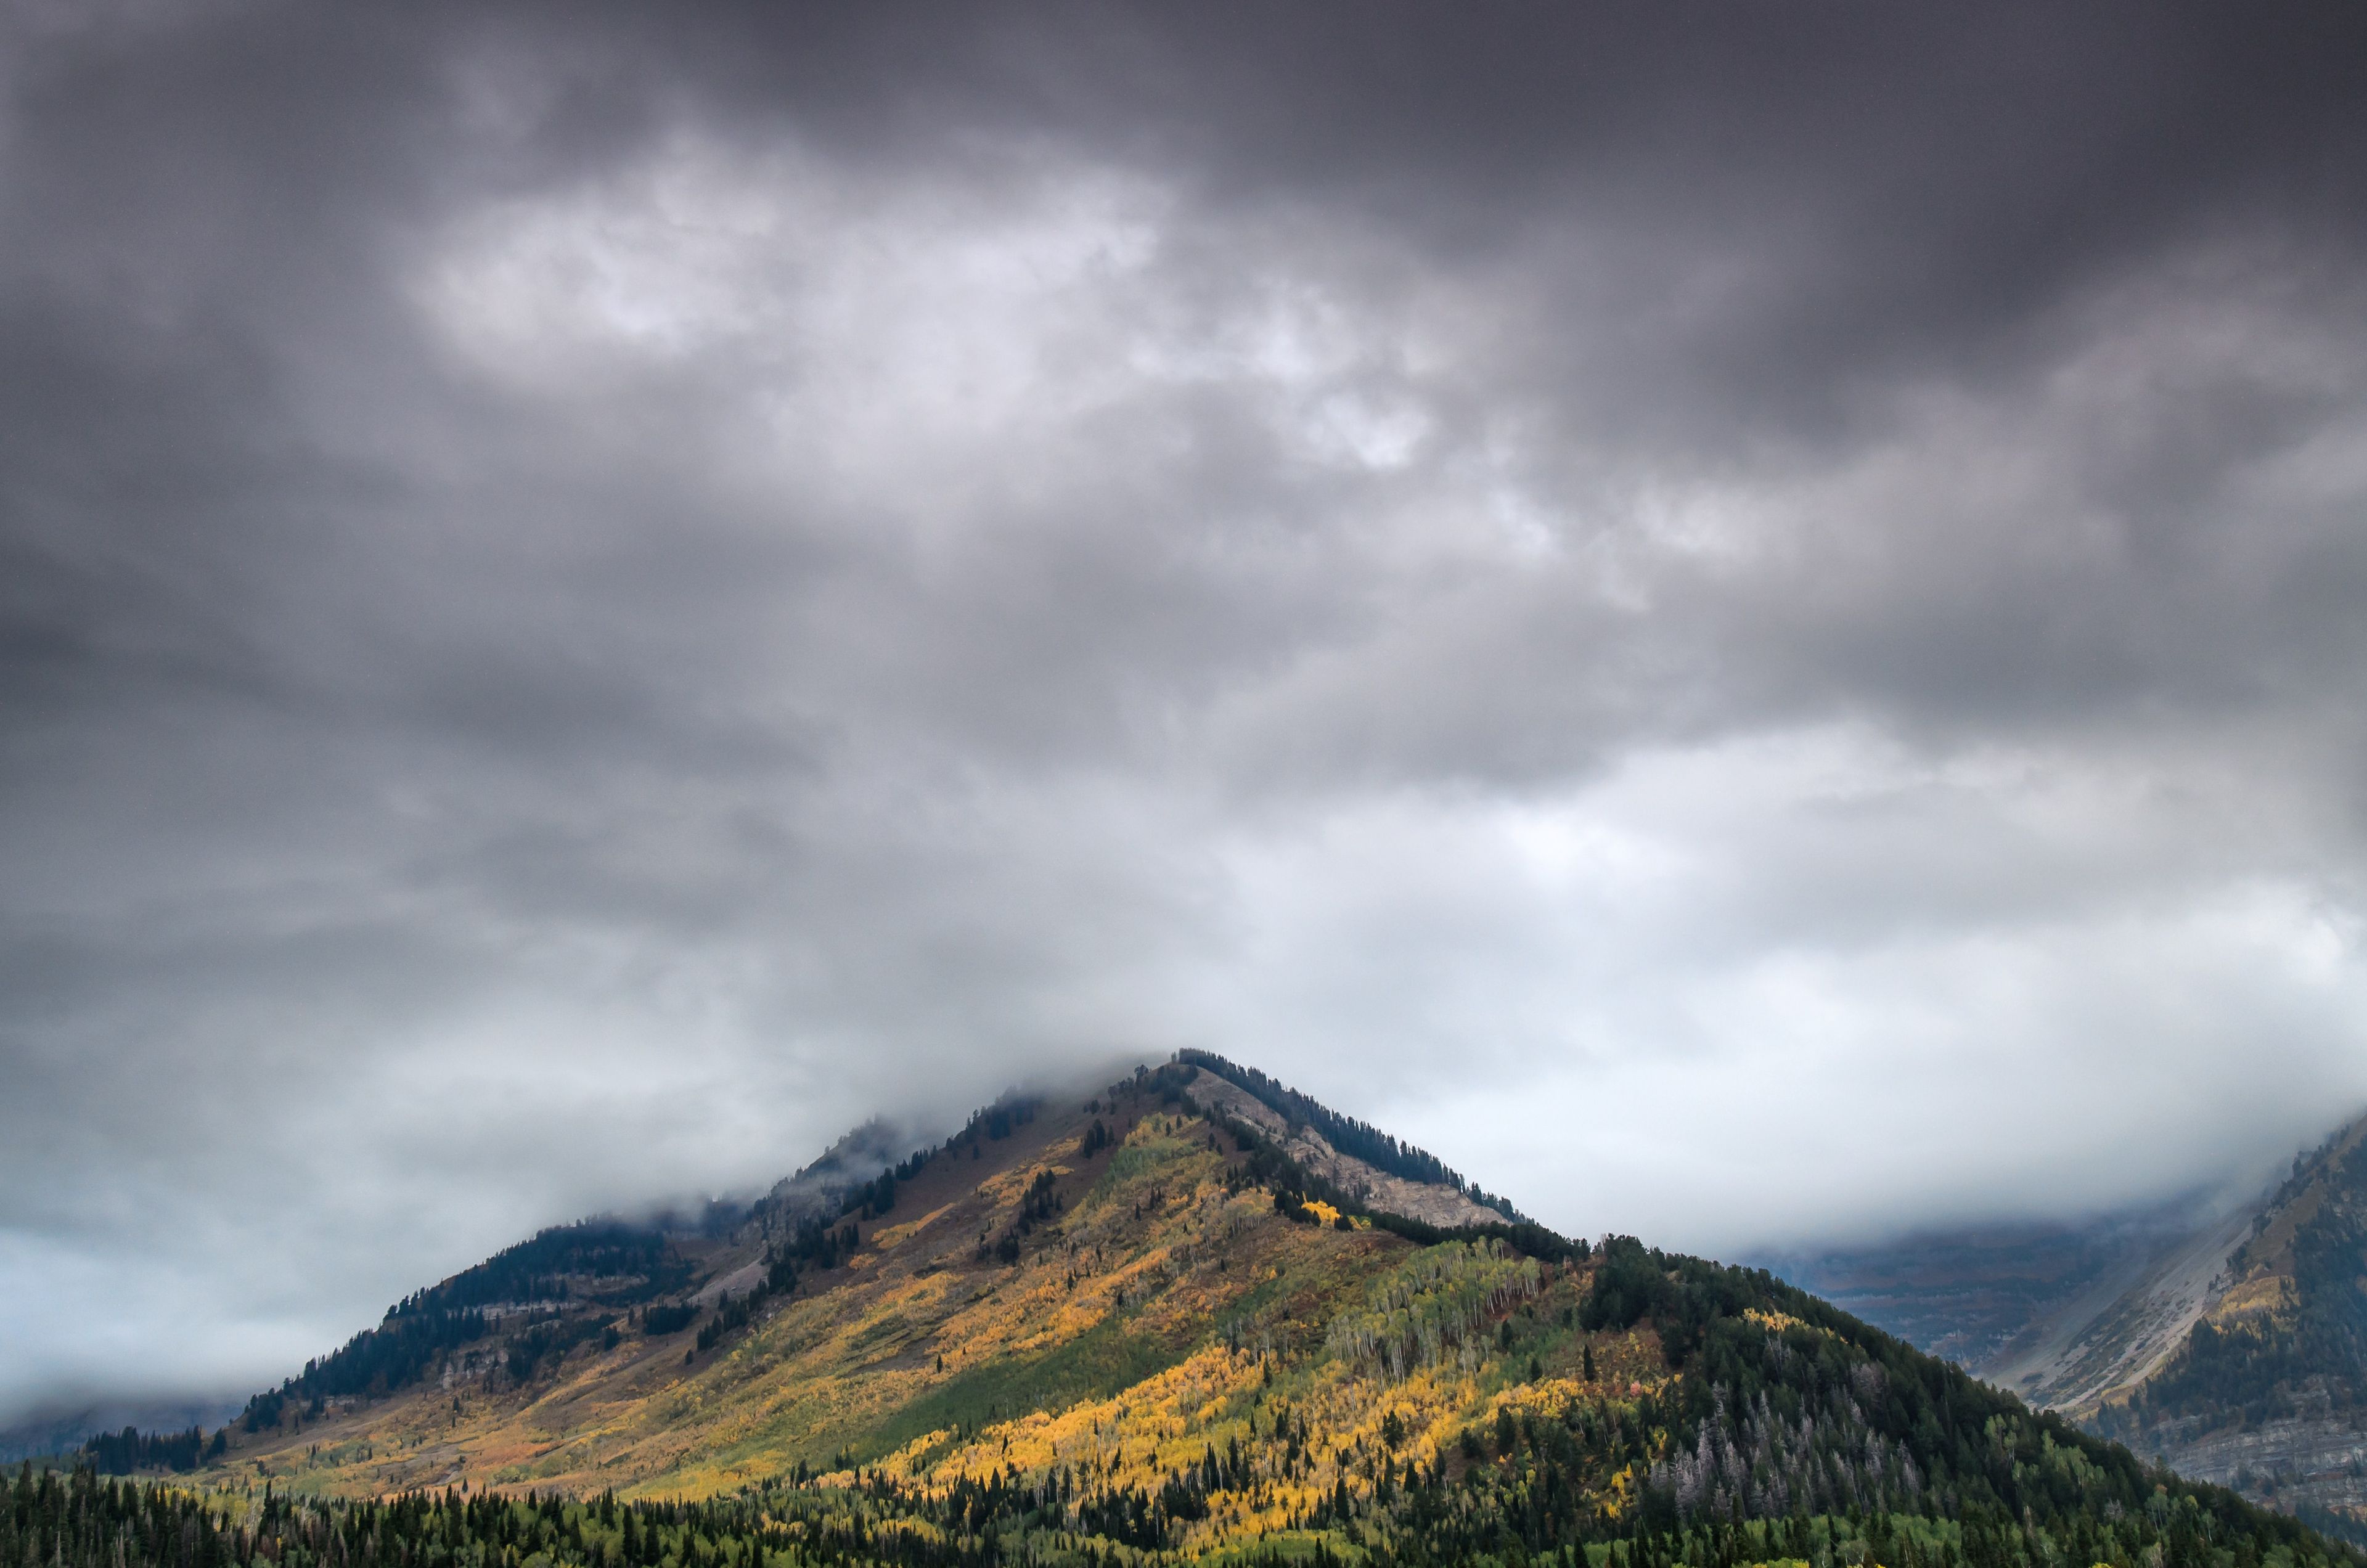 Alpine Loop in autumn with storm clouds.